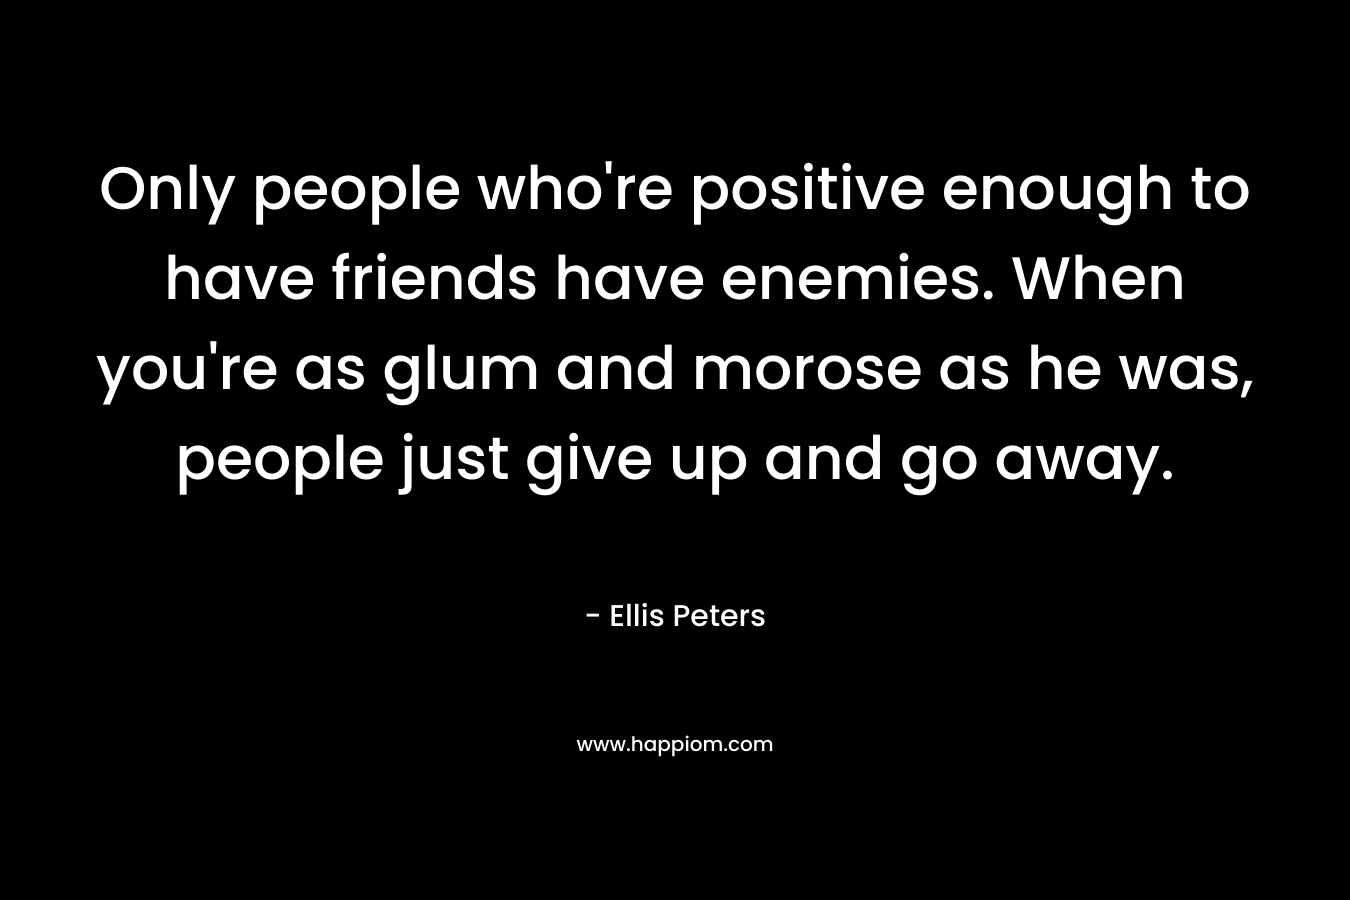 Only people who're positive enough to have friends have enemies. When you're as glum and morose as he was, people just give up and go away.